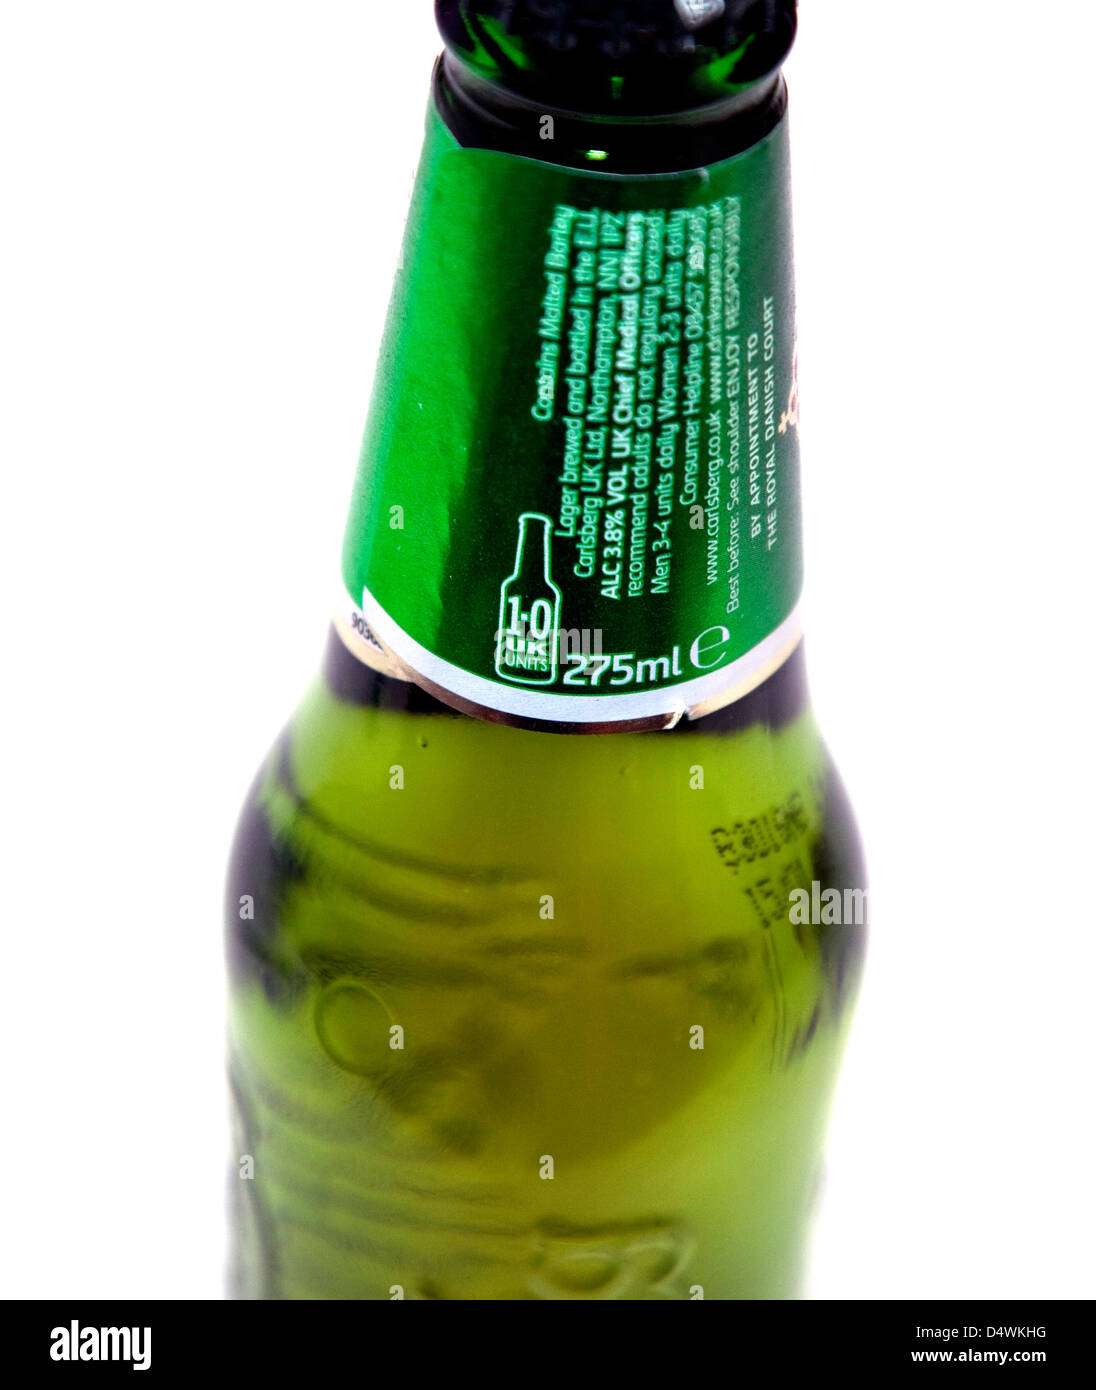 One unit of alcohol information on beer bottle label, London Stock Photo